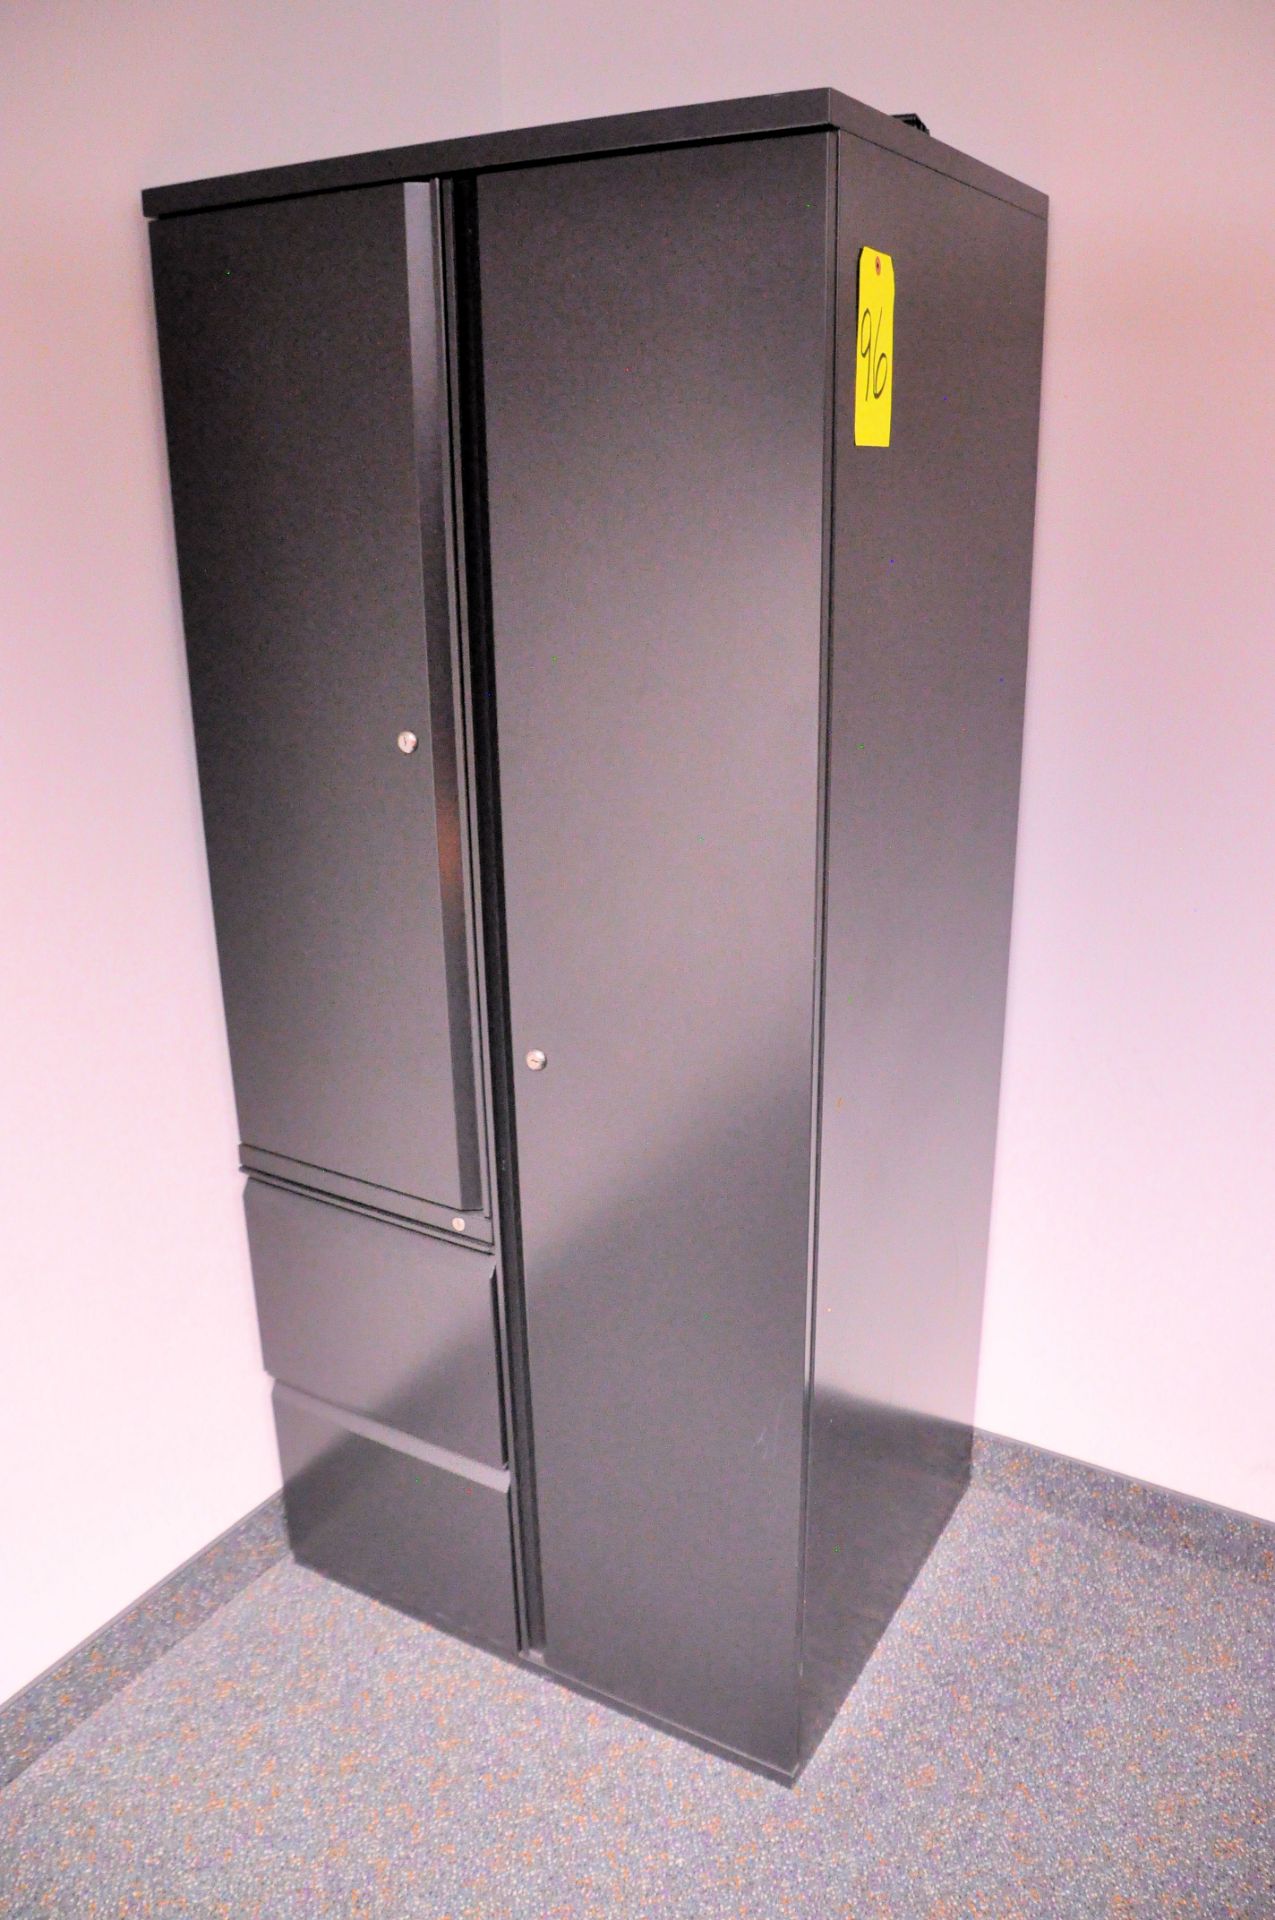 Lot-(1) Herman Miller 4-Station Cubicle Partition Work System with Standing Cabinets, and Partition - Image 7 of 7